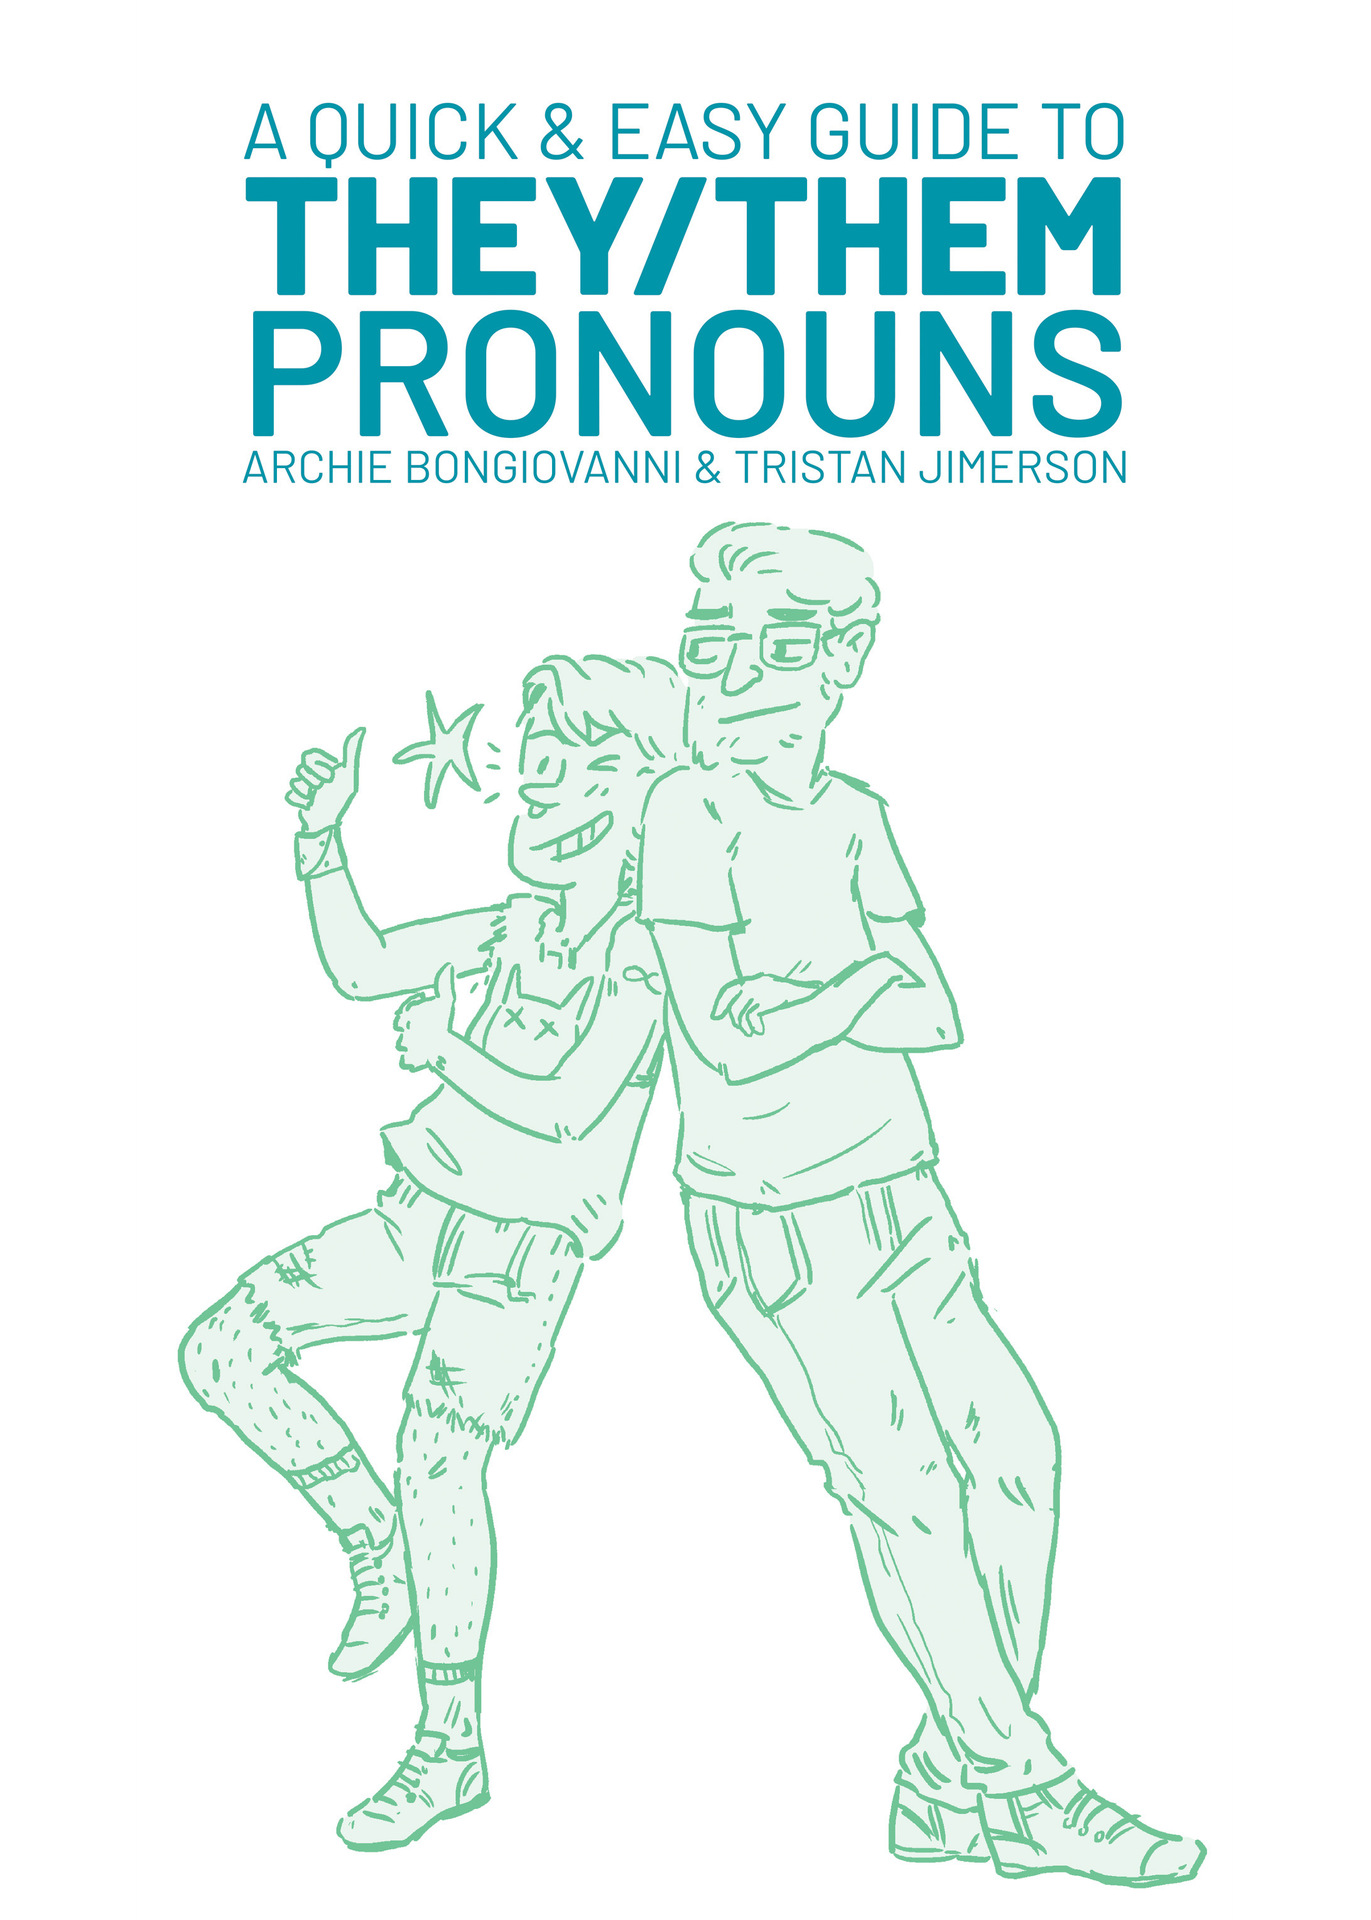 A quick & easy guide to they/them pronouns (2018, Limerence Press)